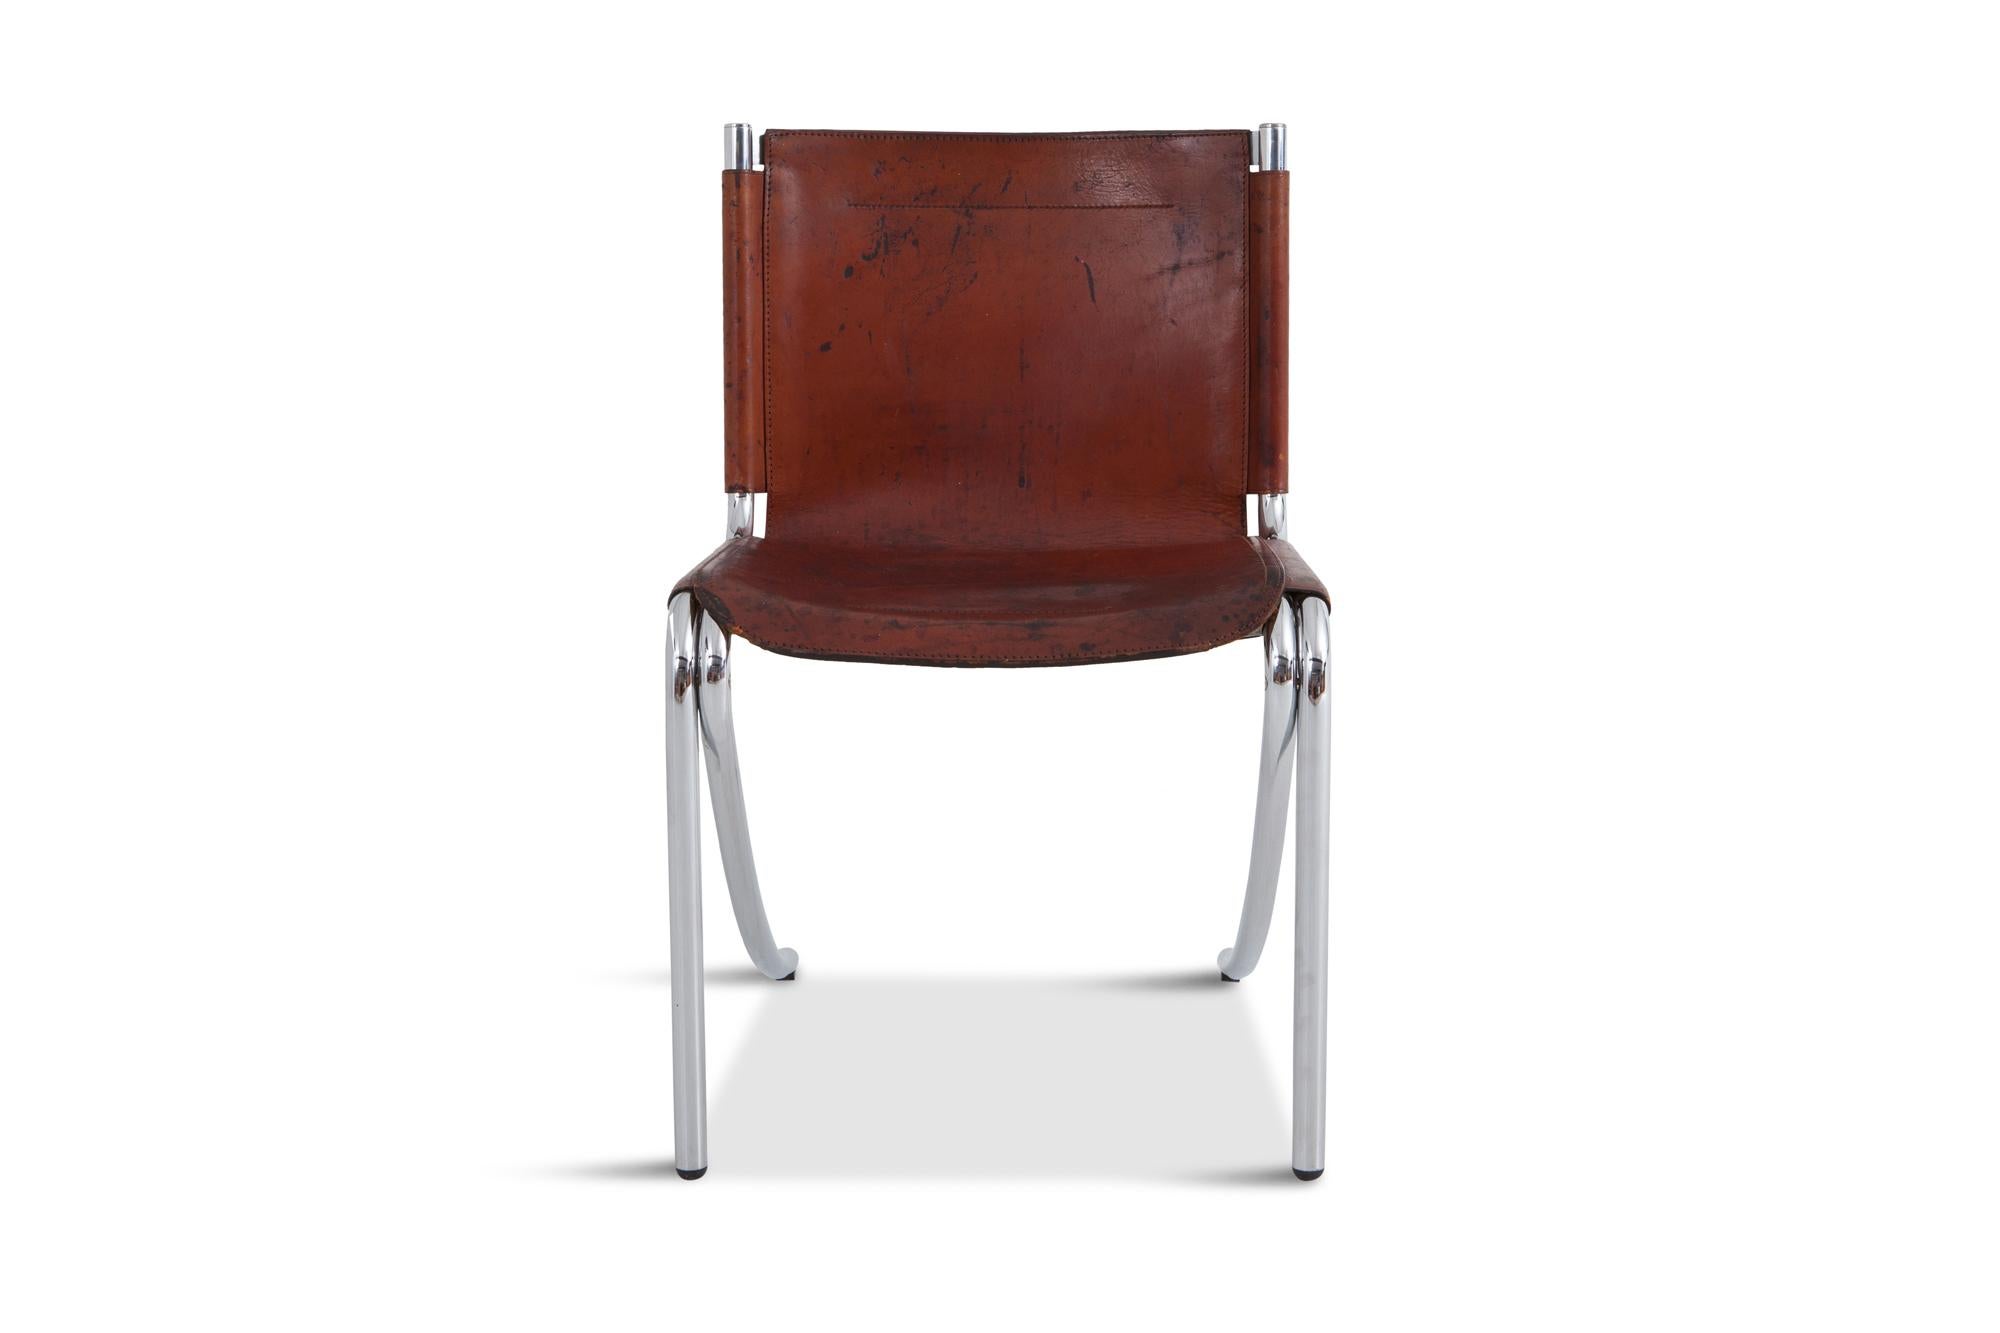 Acerbis Italy manufactured these 'Jot' chairs designed by Giotto Stoppino.

Stunning patina on the leather adds tons of character on these oxblood leather chairs.
The chrome frame is also still in really good condition.

We have four pieces